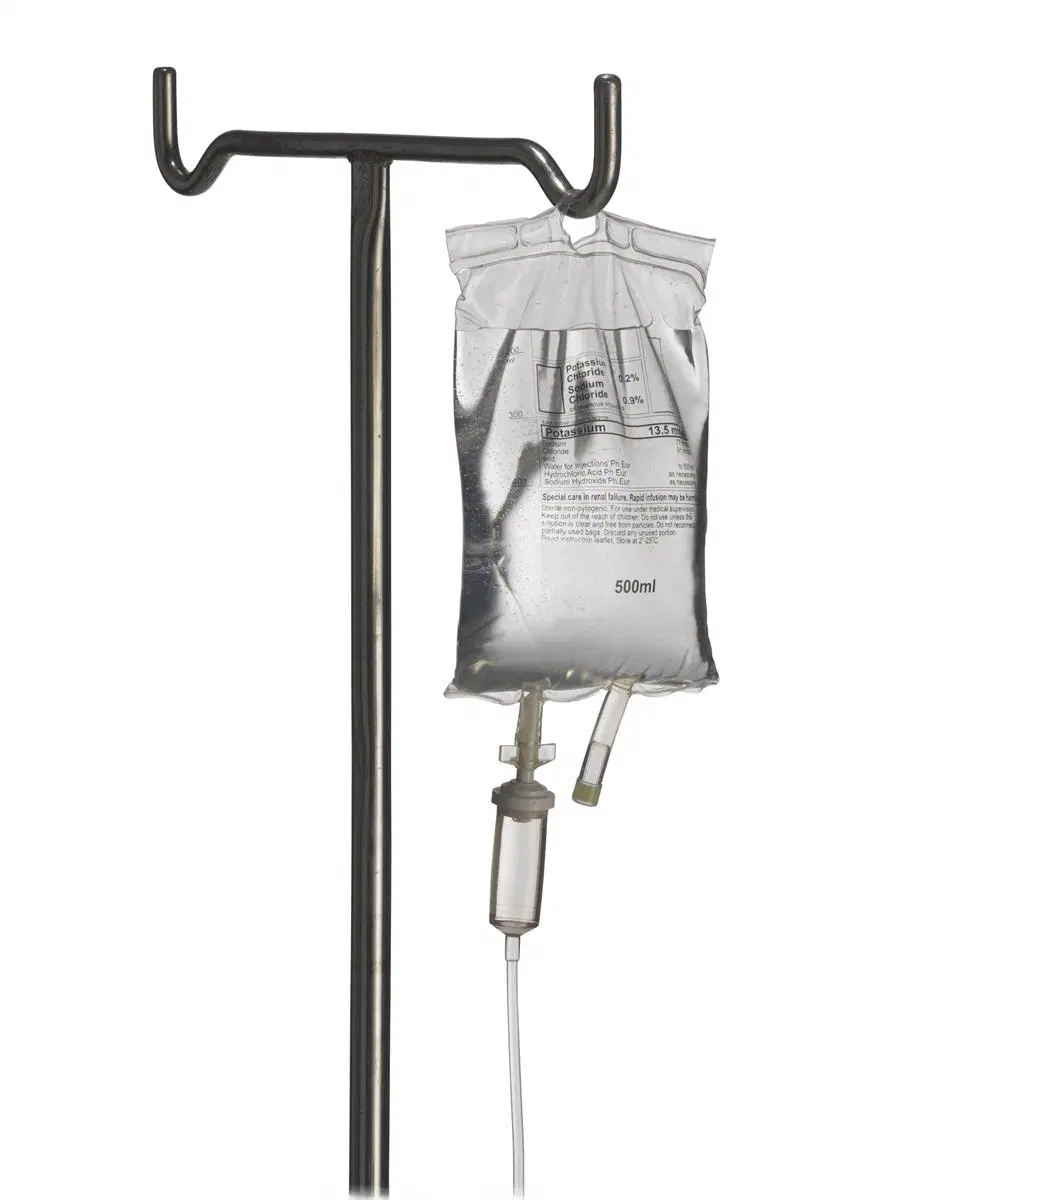 Siny Manufacture Disposable Hospital Sterile Safety Medical PVC Infusion Bag